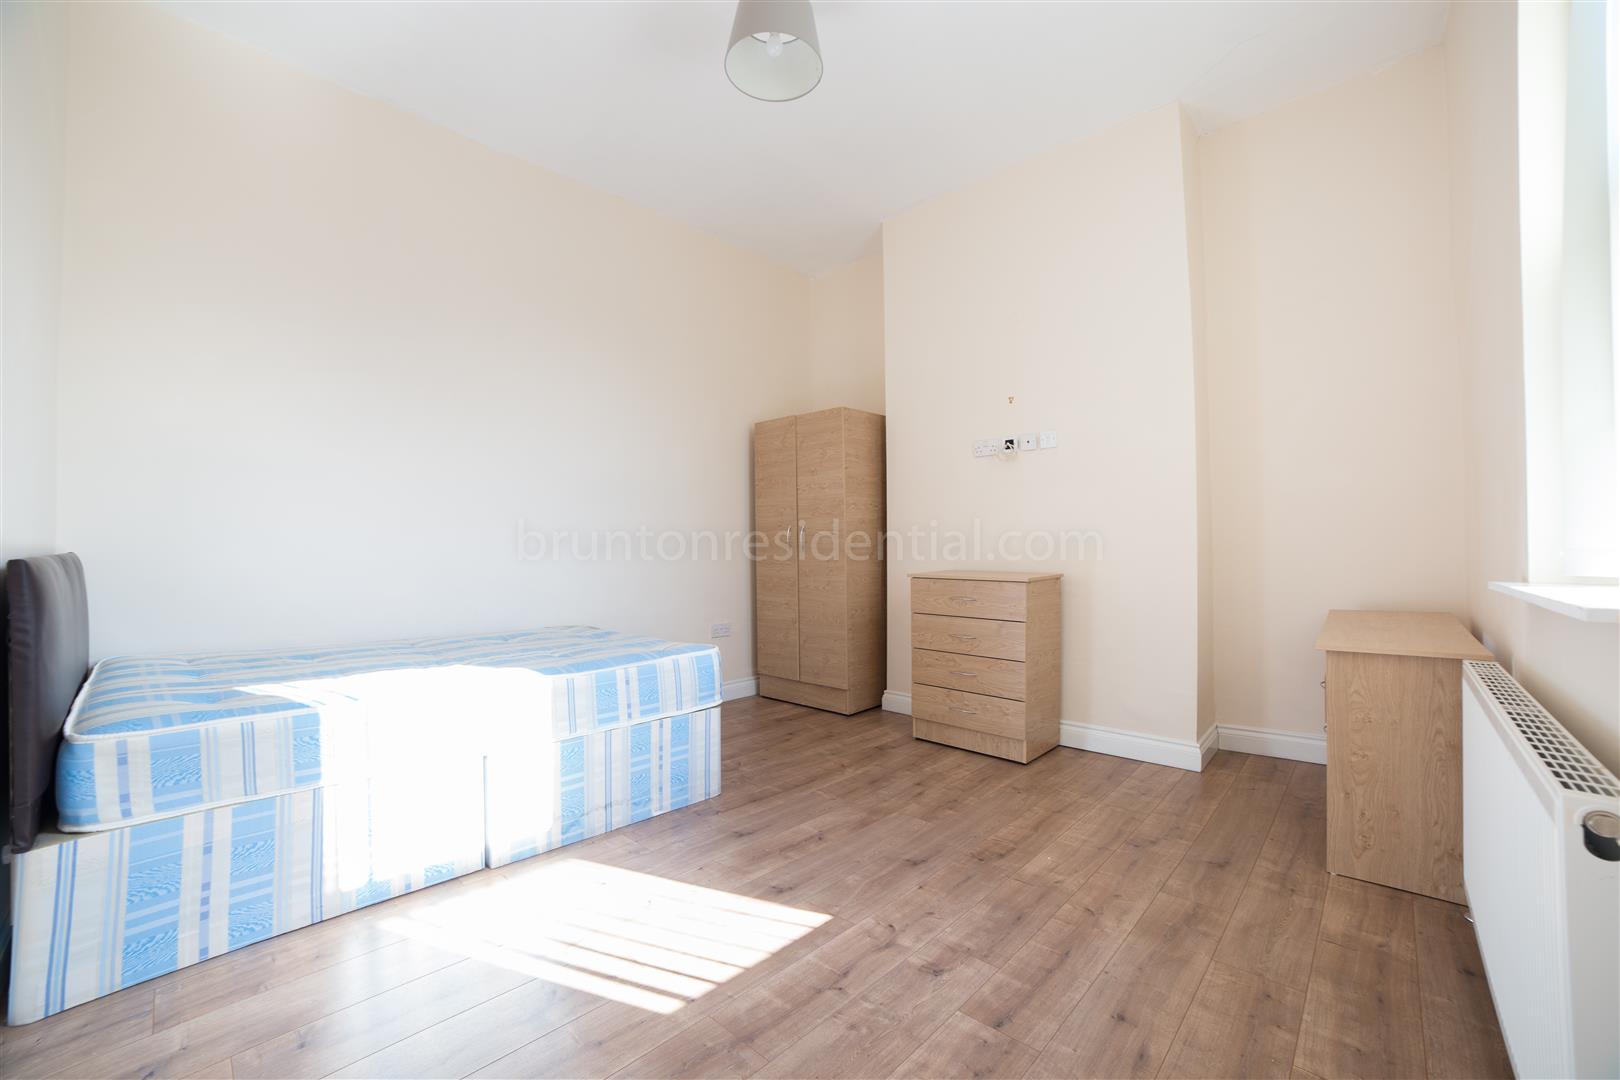 4 bed maisonette to rent in Chillingham Road, Newcastle Upon Tyne  - Property Image 10